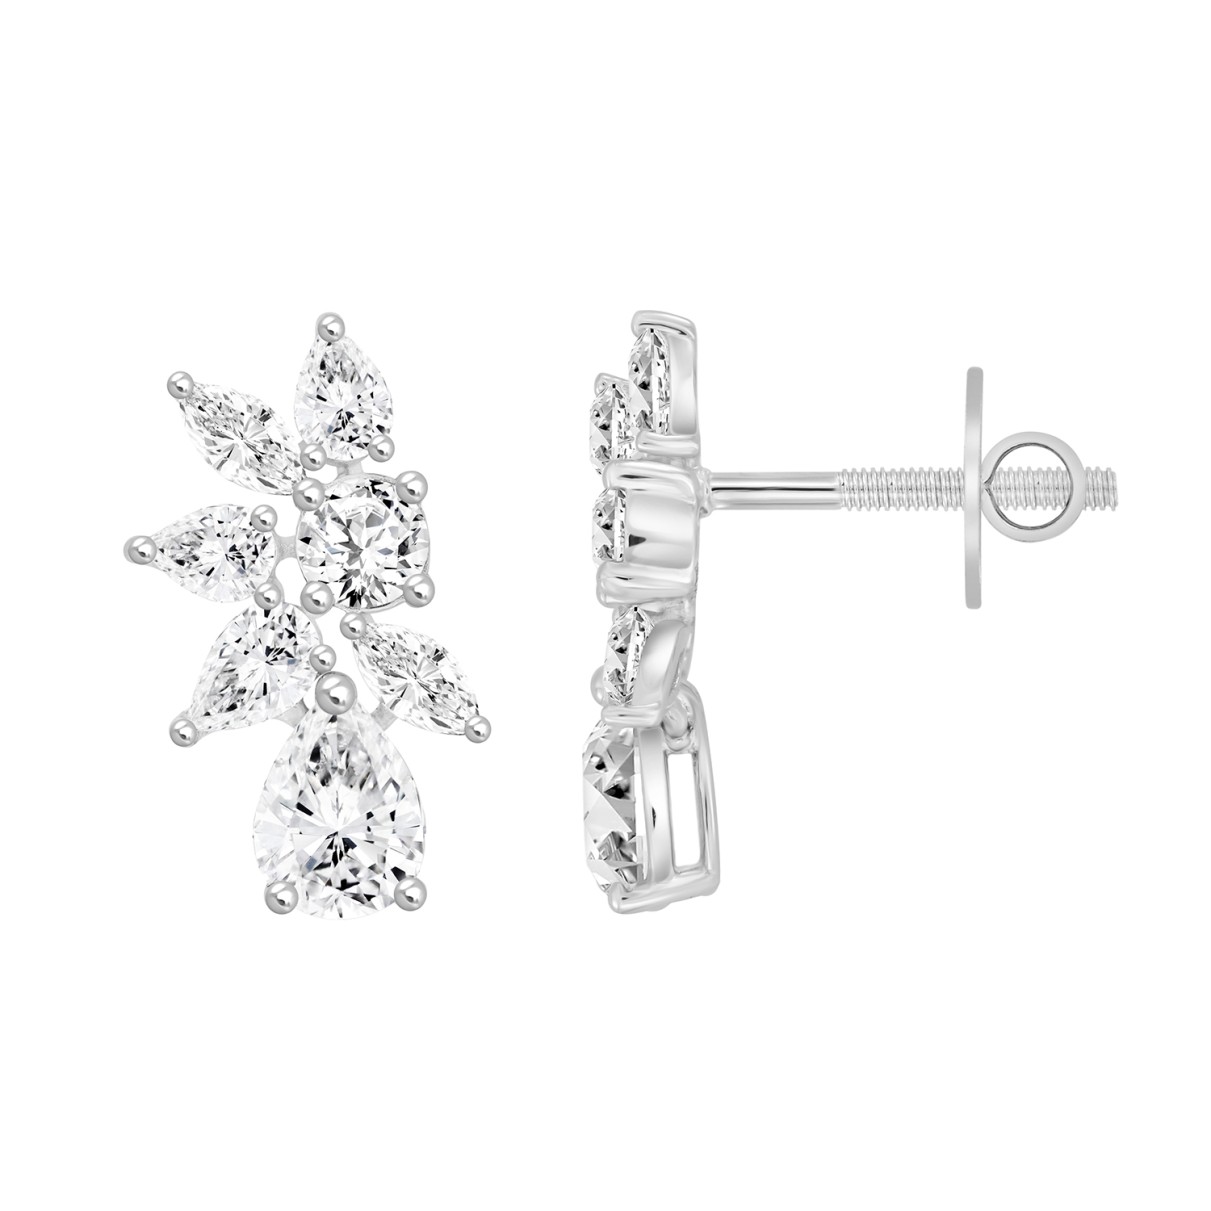 LADIES STUD EARRINGS  4 1/2CT PEAR/ROUND/MARQUISE DIAMOND 14K WHITE GOLD